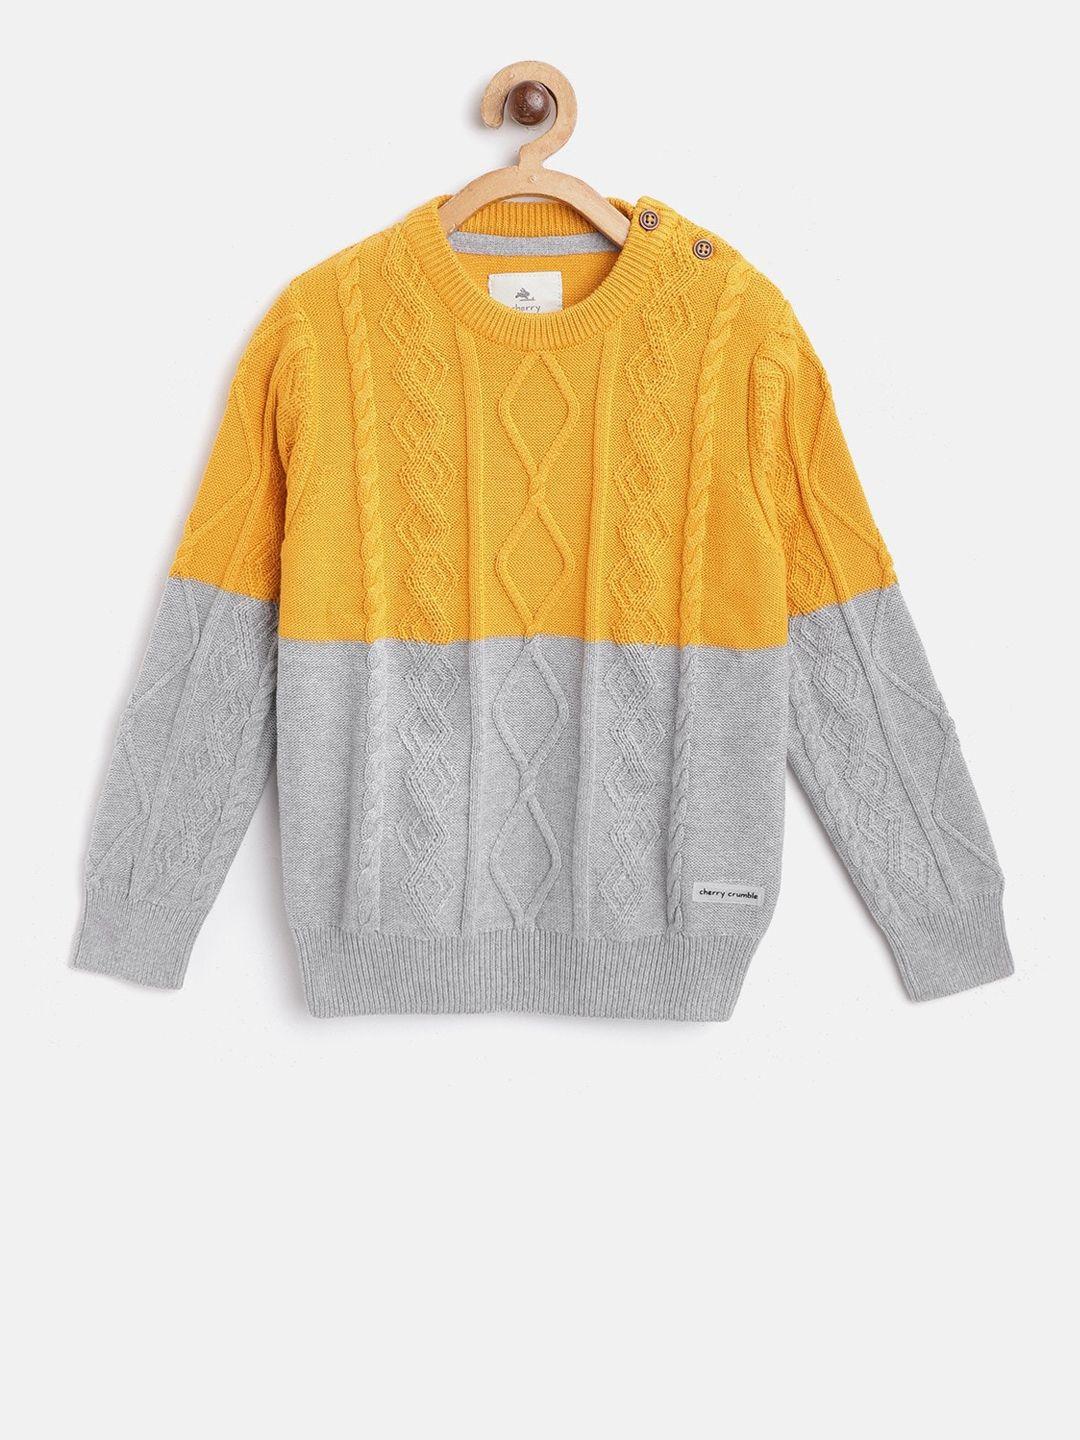 cherry-crumble-boys-and-girls-yellow-cable-knit-mustard-sweater